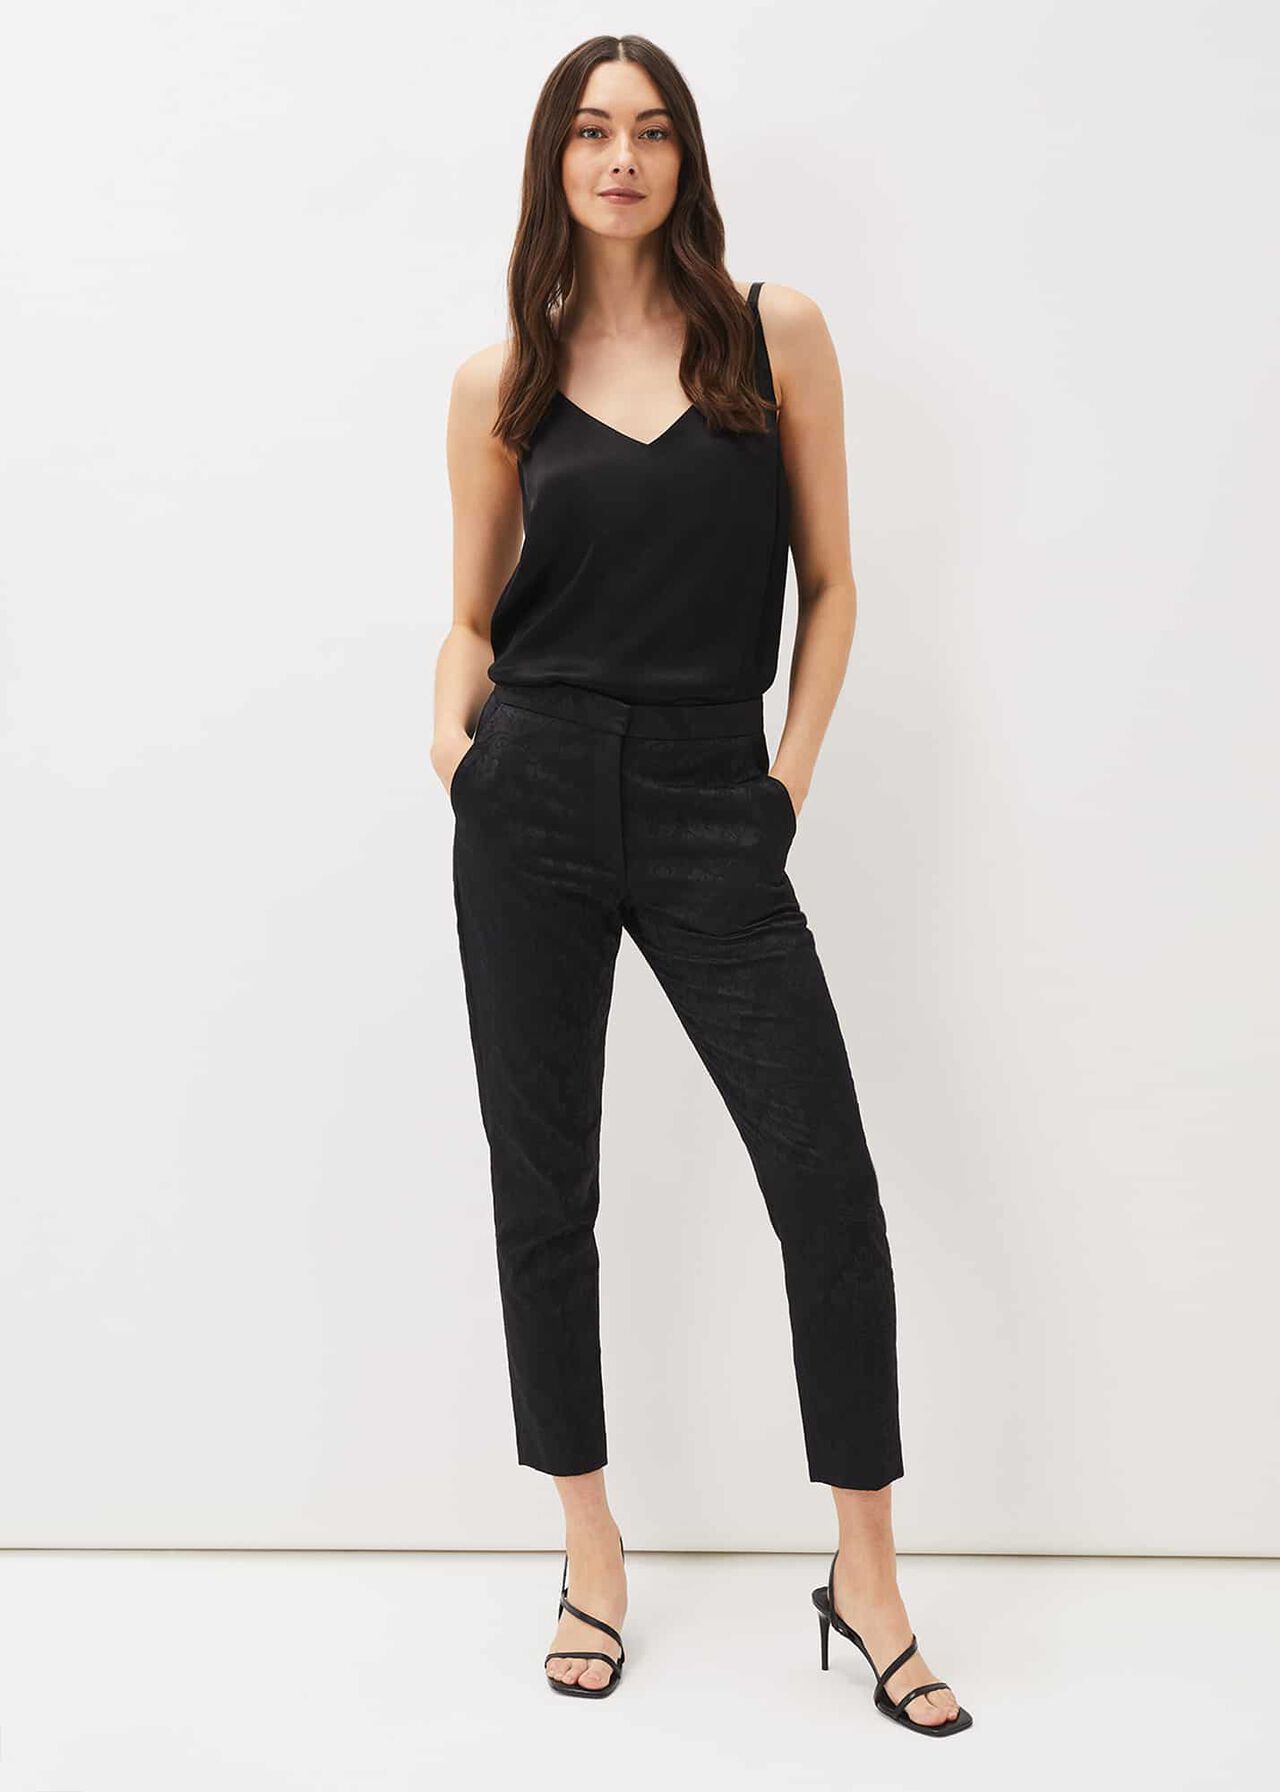 Joanne Jacquard Trousers | Phase Eight